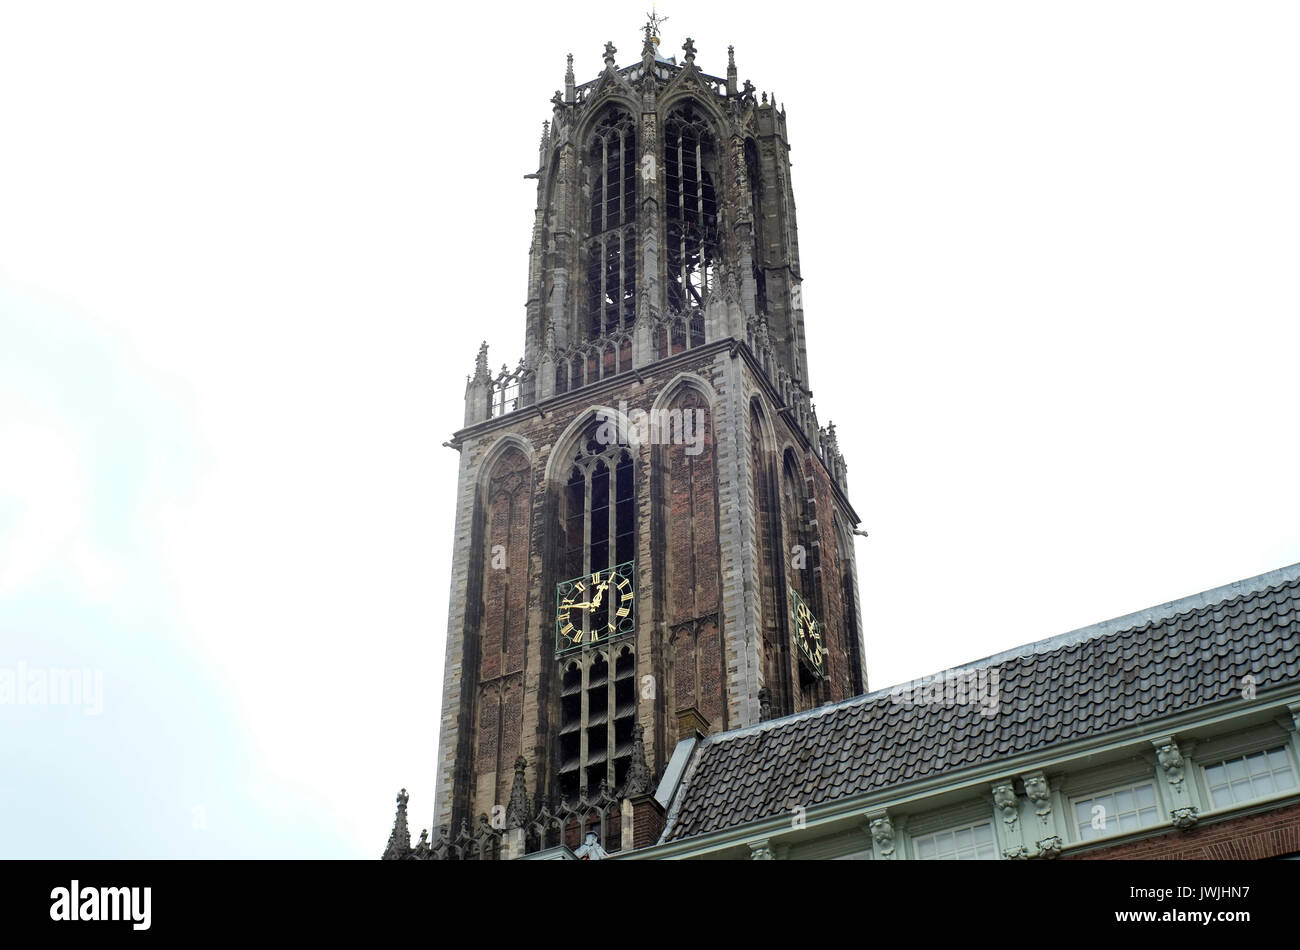 The Dom Tower, the tallest church tower in the Netherlands, is seen in Utrecht, Holland August 5, 2017.  © John Voo Stock Photo